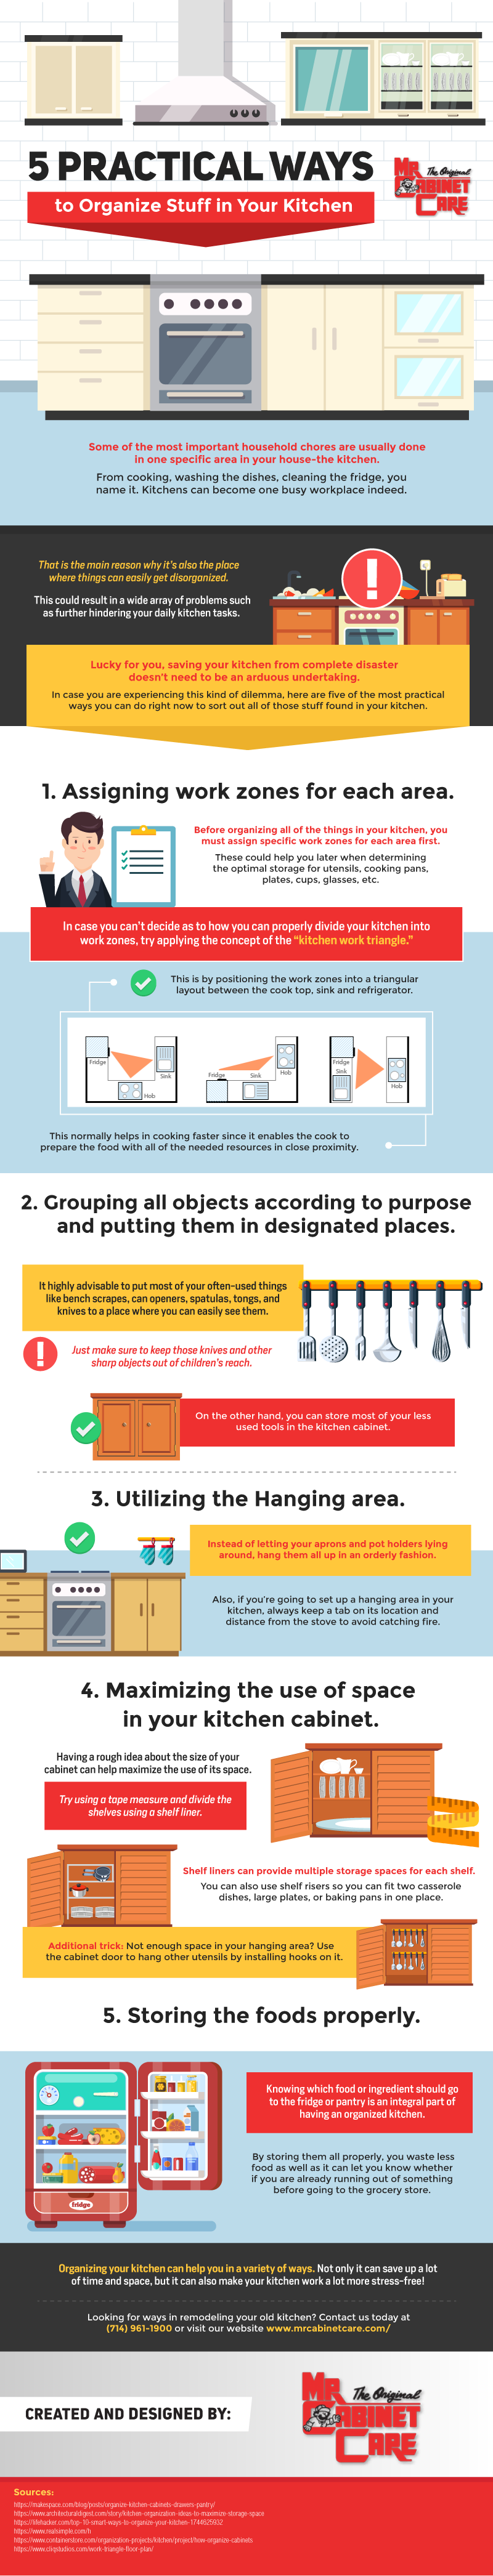 5 Practical Ways to Organize Stuff in Your Kitchen - Infographic